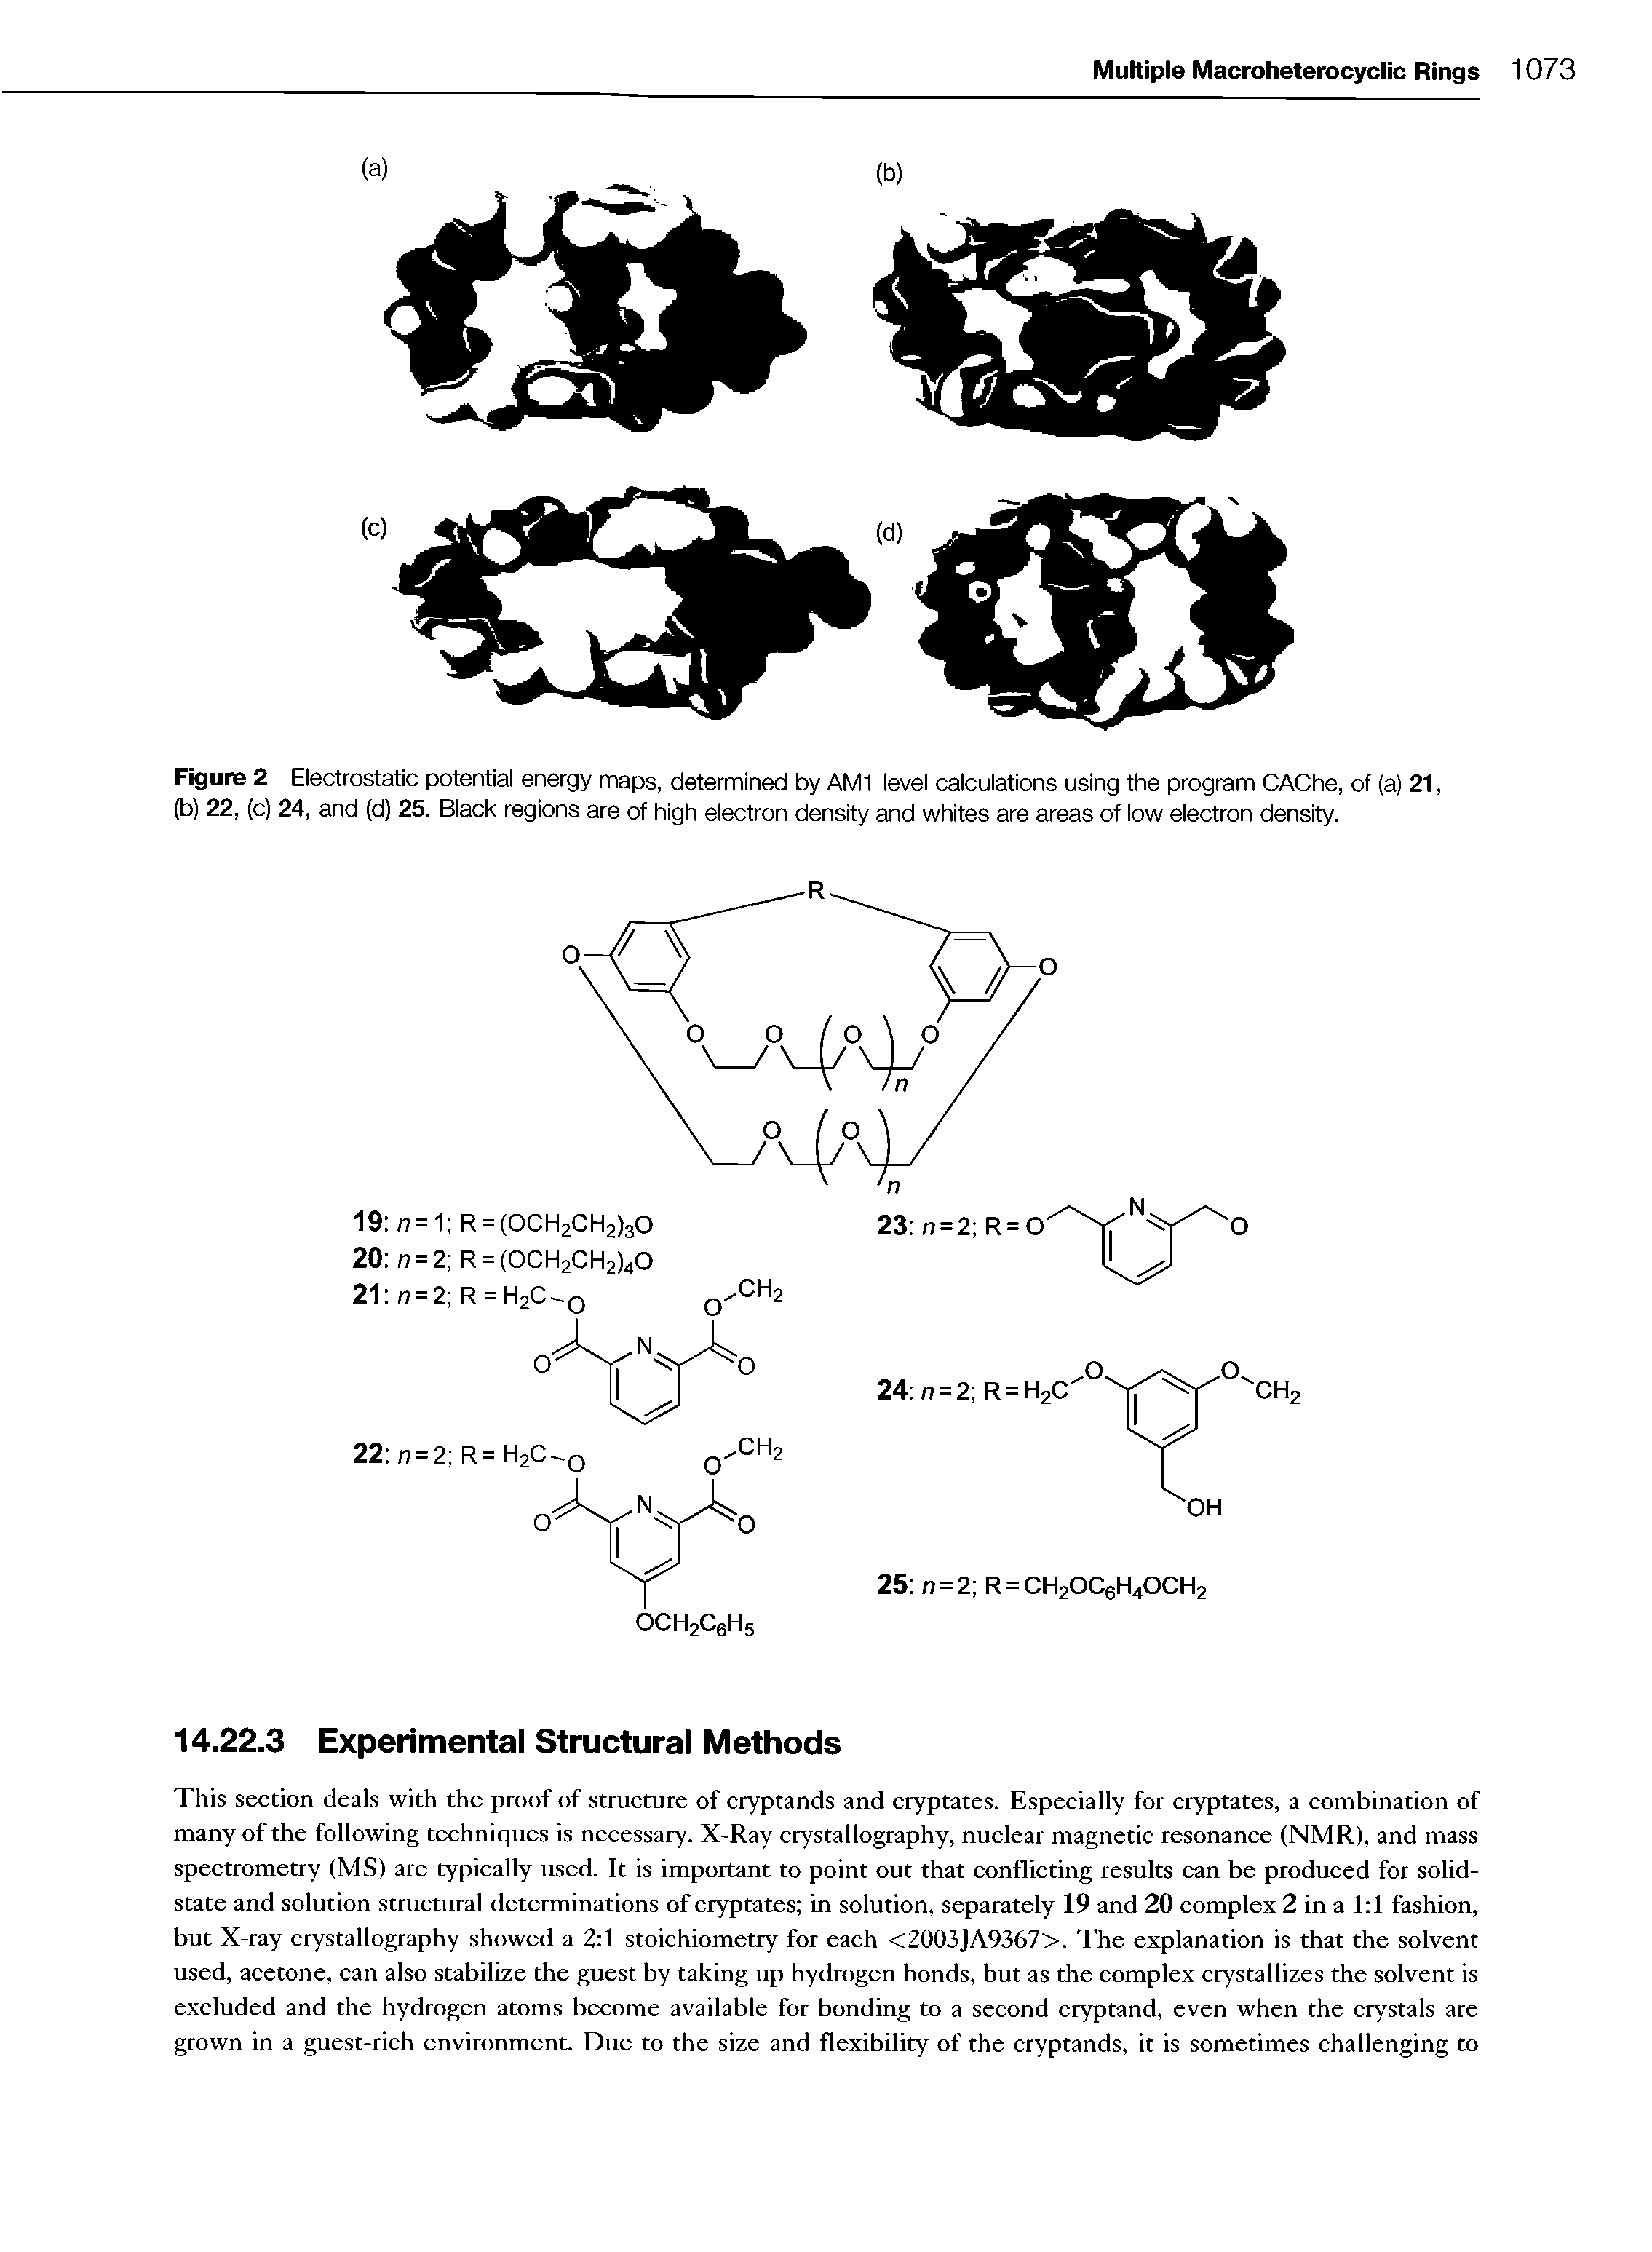 Figure 2 Electrostatic potential energy maps, determined by AMI level calculations using the program CAChe, of (a) 21, (b) 22, (c) 24, and (d) 25. Black regions are of high electron density and whites are areas of low electron density.